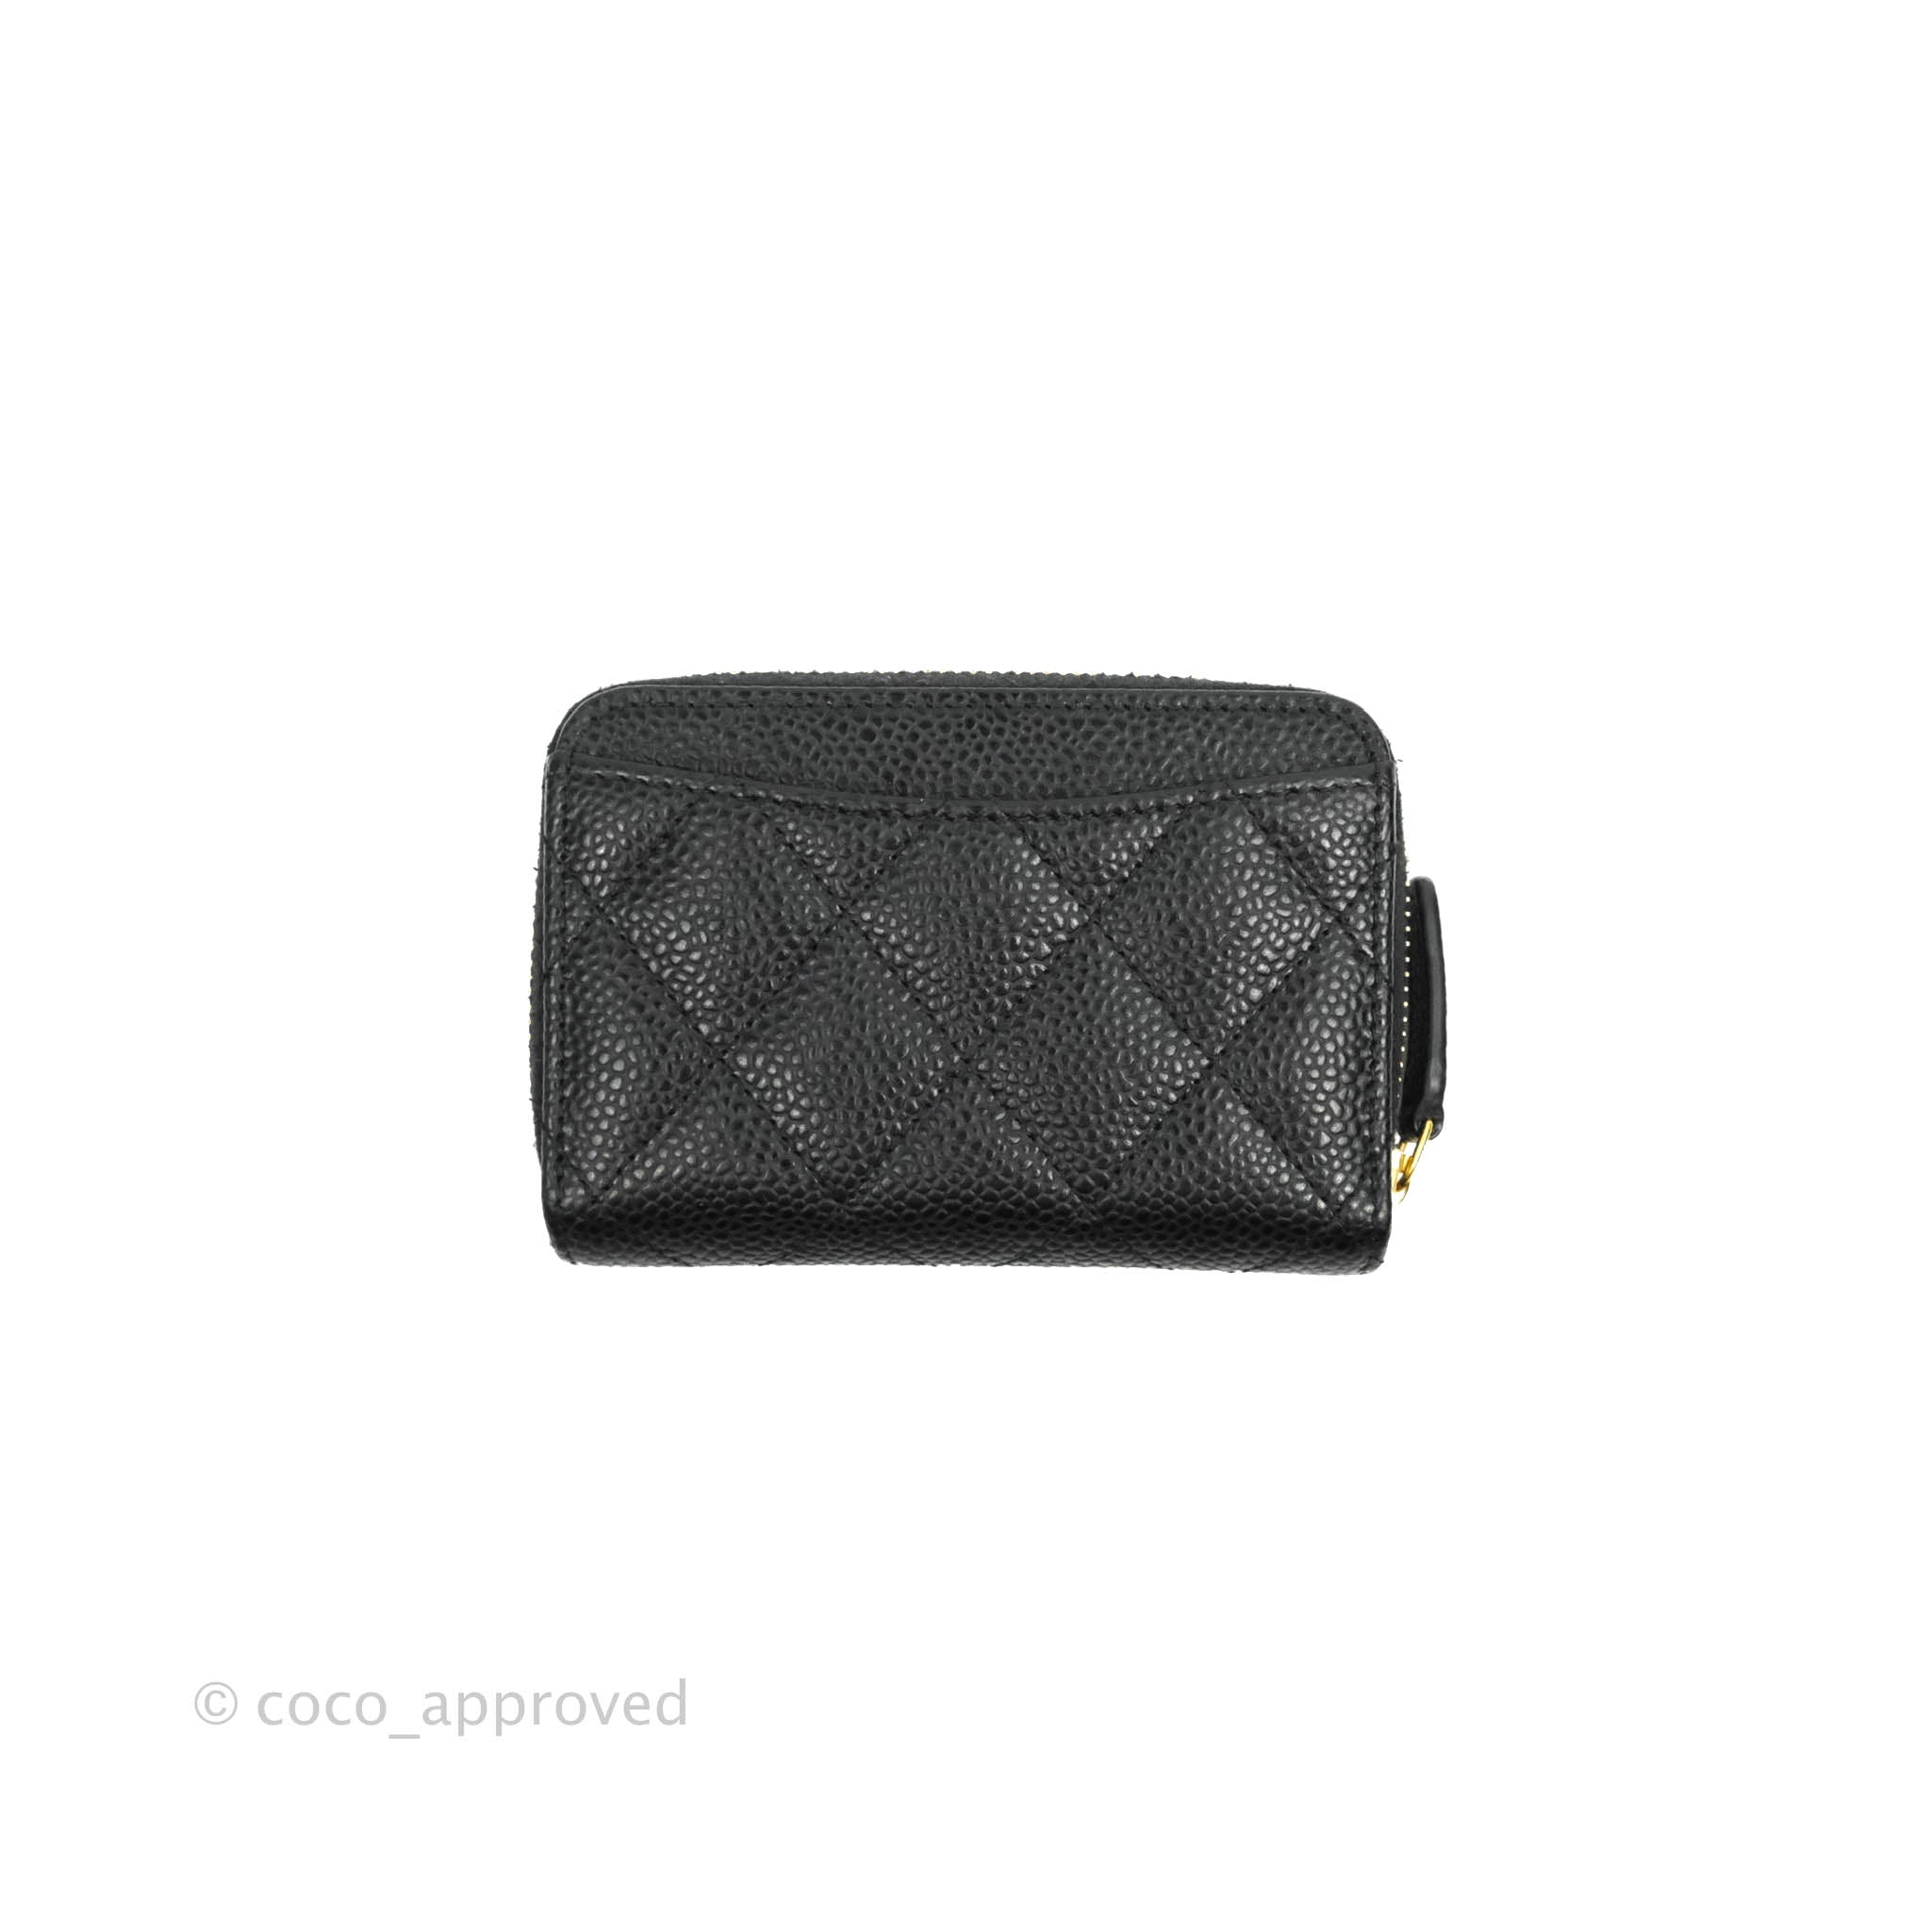 CHANEL Caviar Quilted Striated CC Zip Coin Purse White 1282002